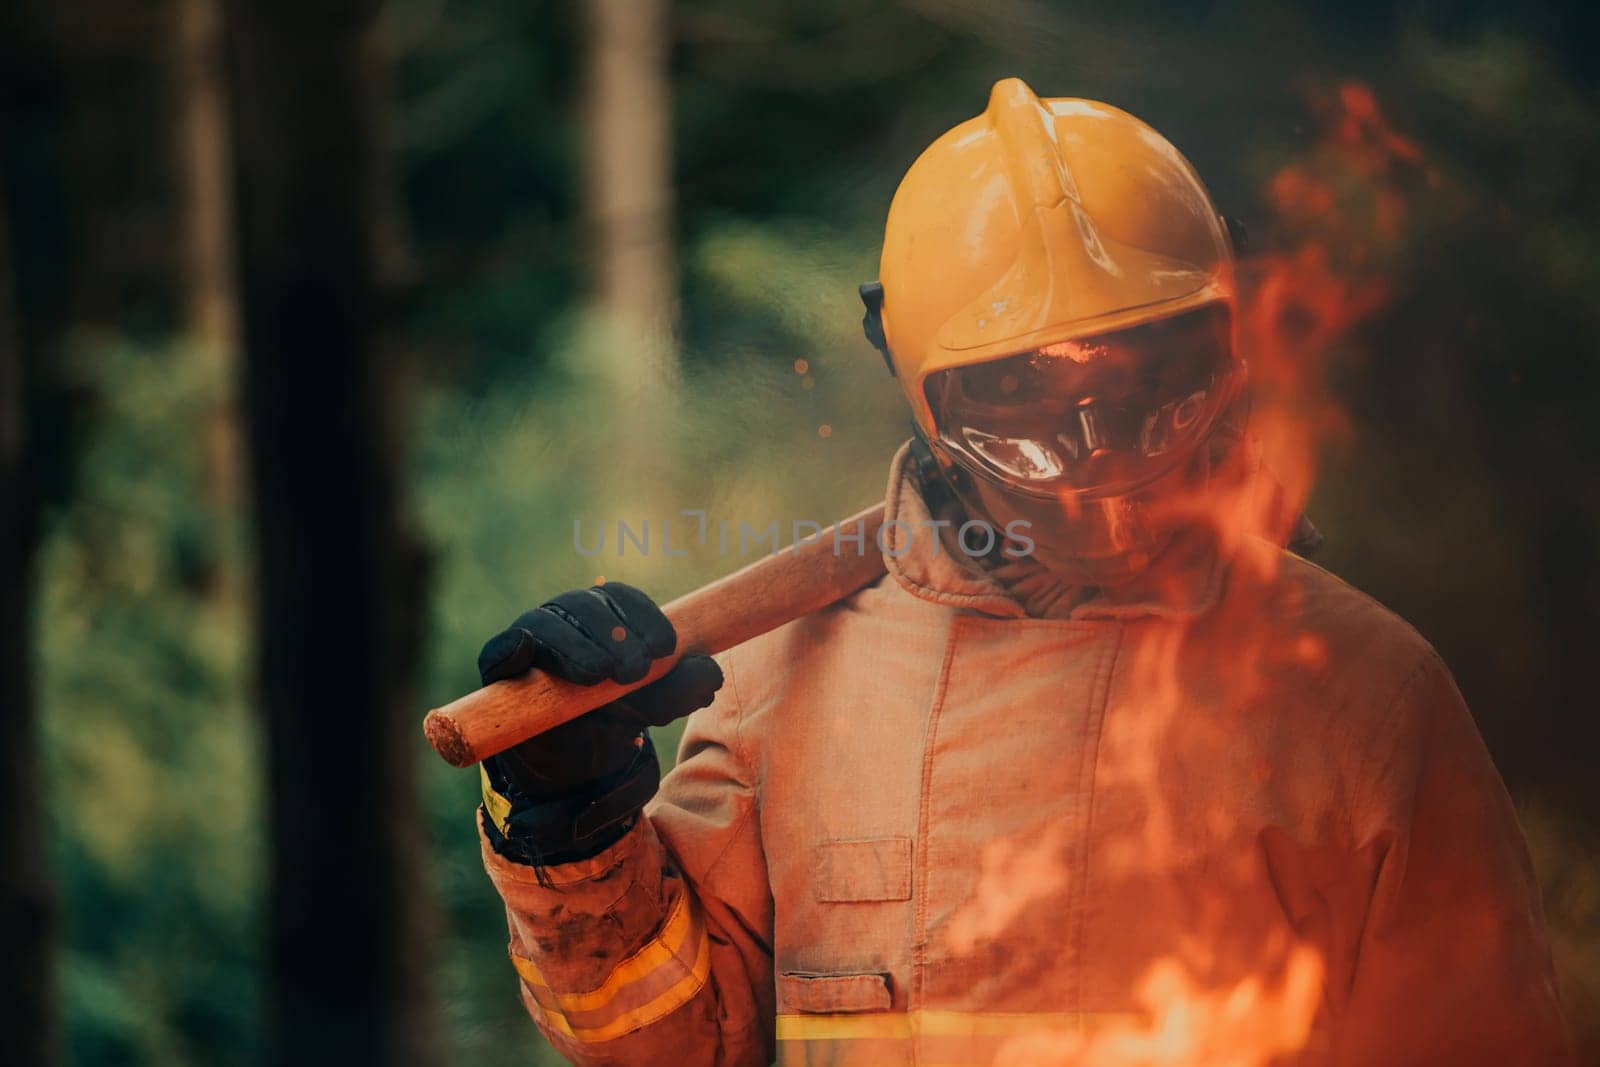 Firefighter at job. Firefighter in dangerous forest areas surrounded by strong fire. Concept of the work of the fire service by dotshock